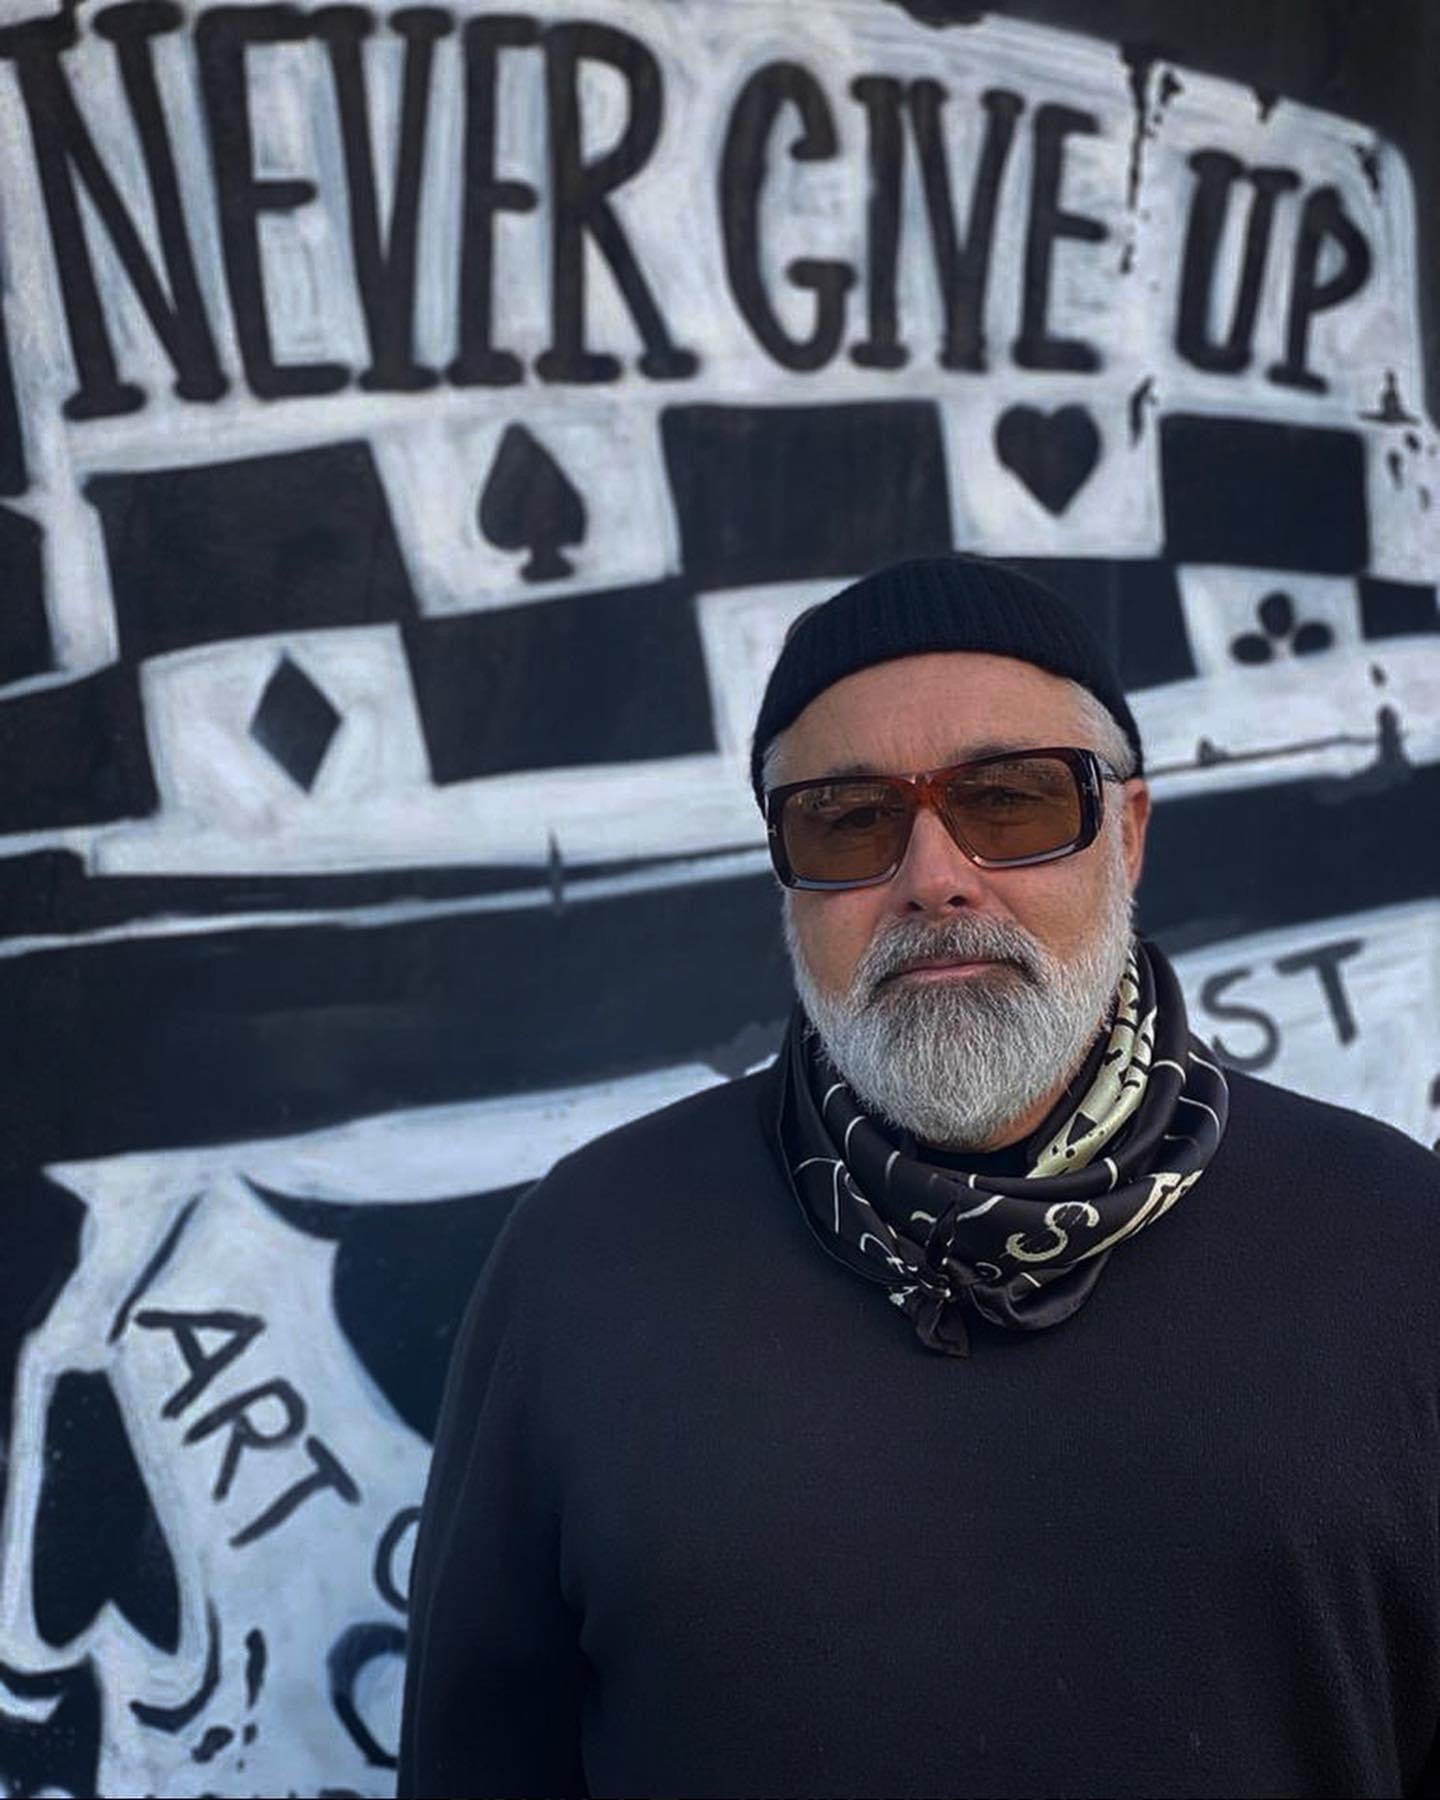 "Never Give Up" Scarf